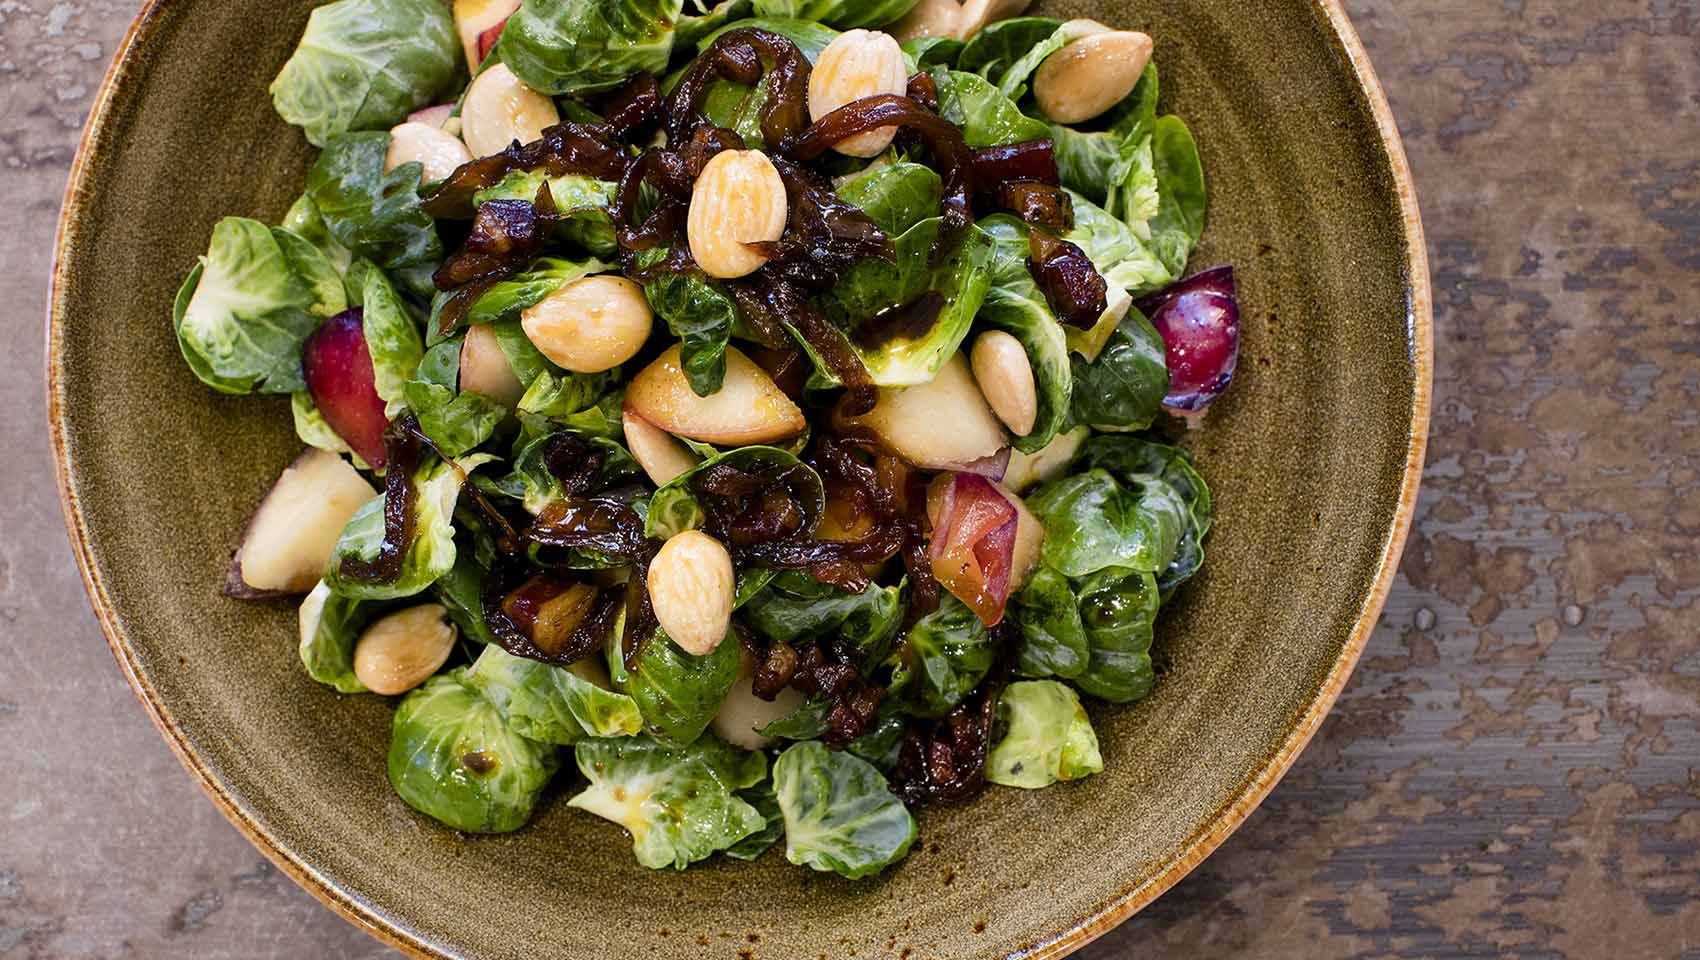 B&O's Brussel Sprout Salad